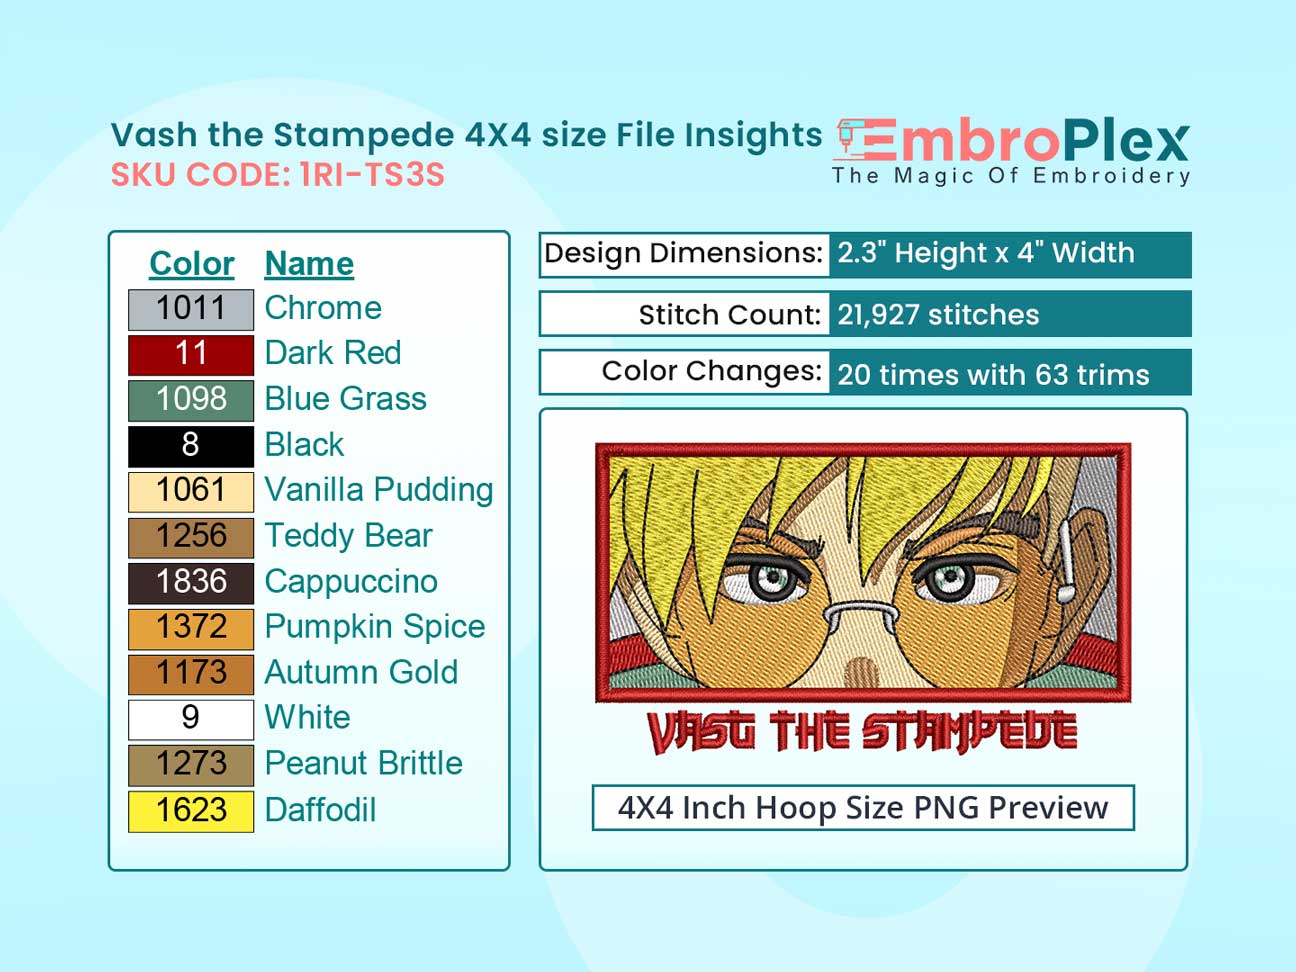 Anime-Inspired Vash the Stampede Embroidery Design File - 4x4 Inch hoop Size Variation overview image